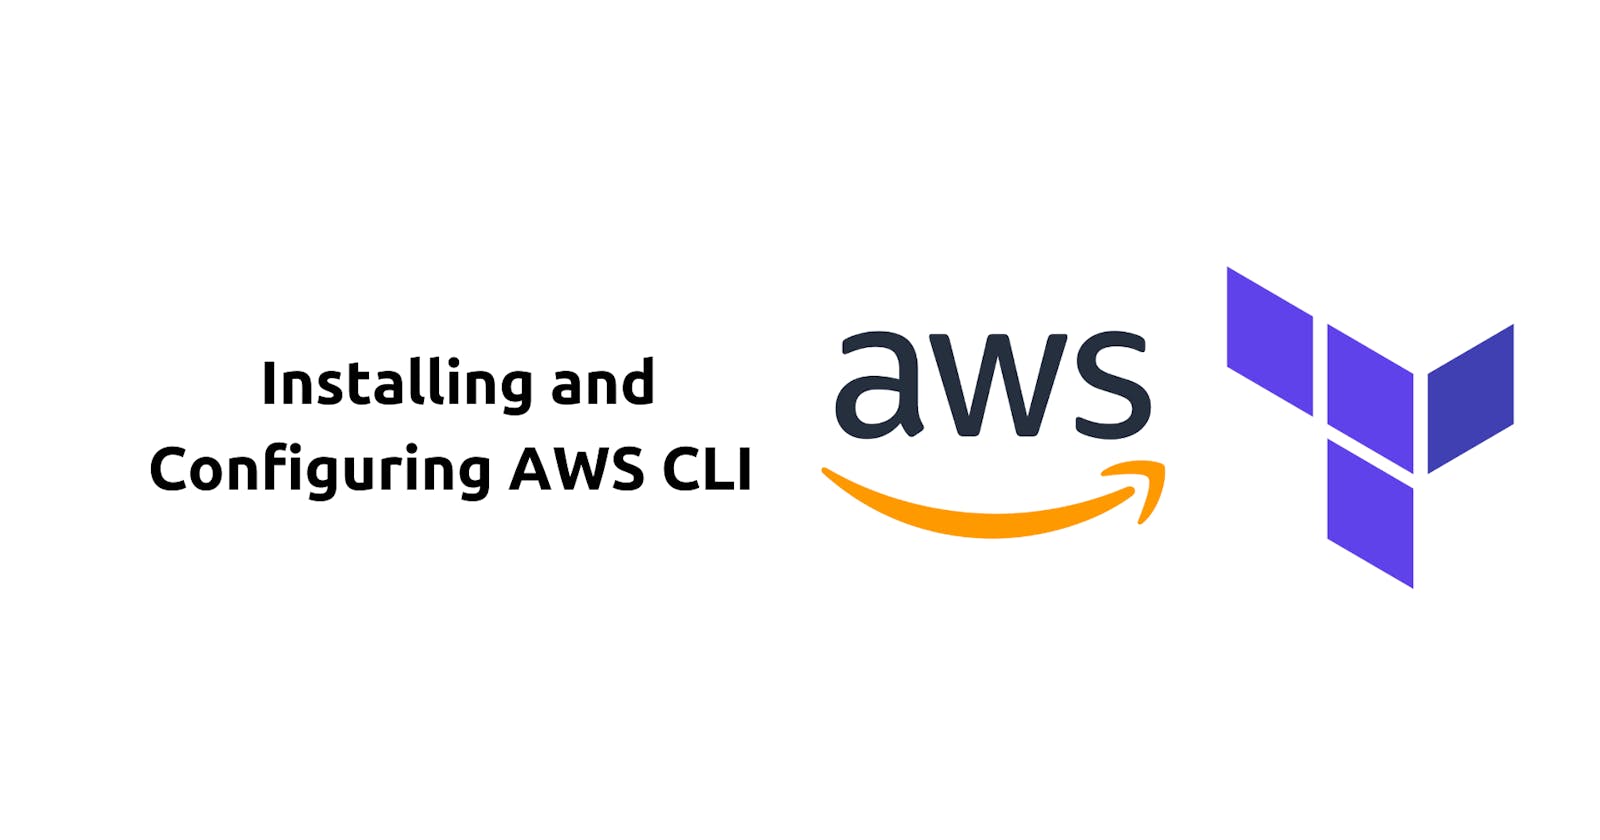 Installing and Configuring AWS CLI